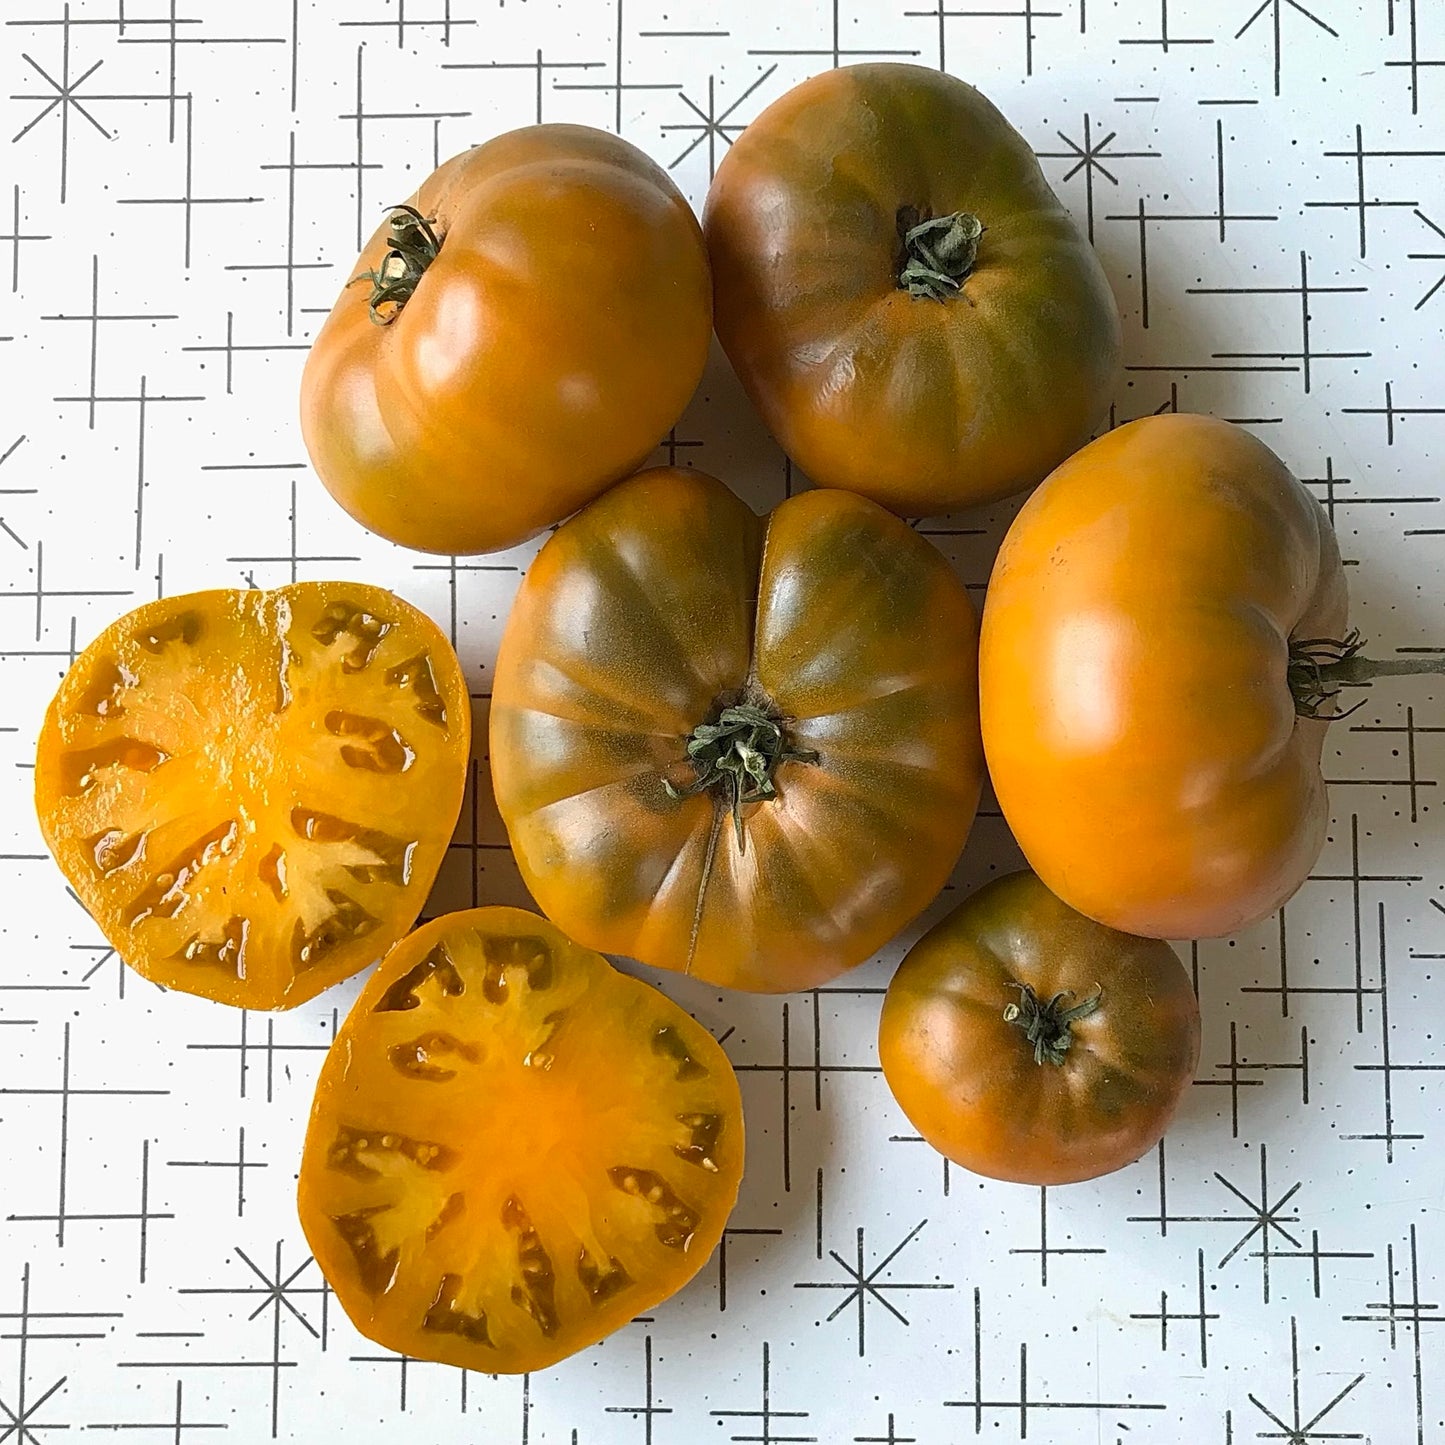 Orange beefsteak tomatoes with olive green shoulders, one cut in half to display its interior.